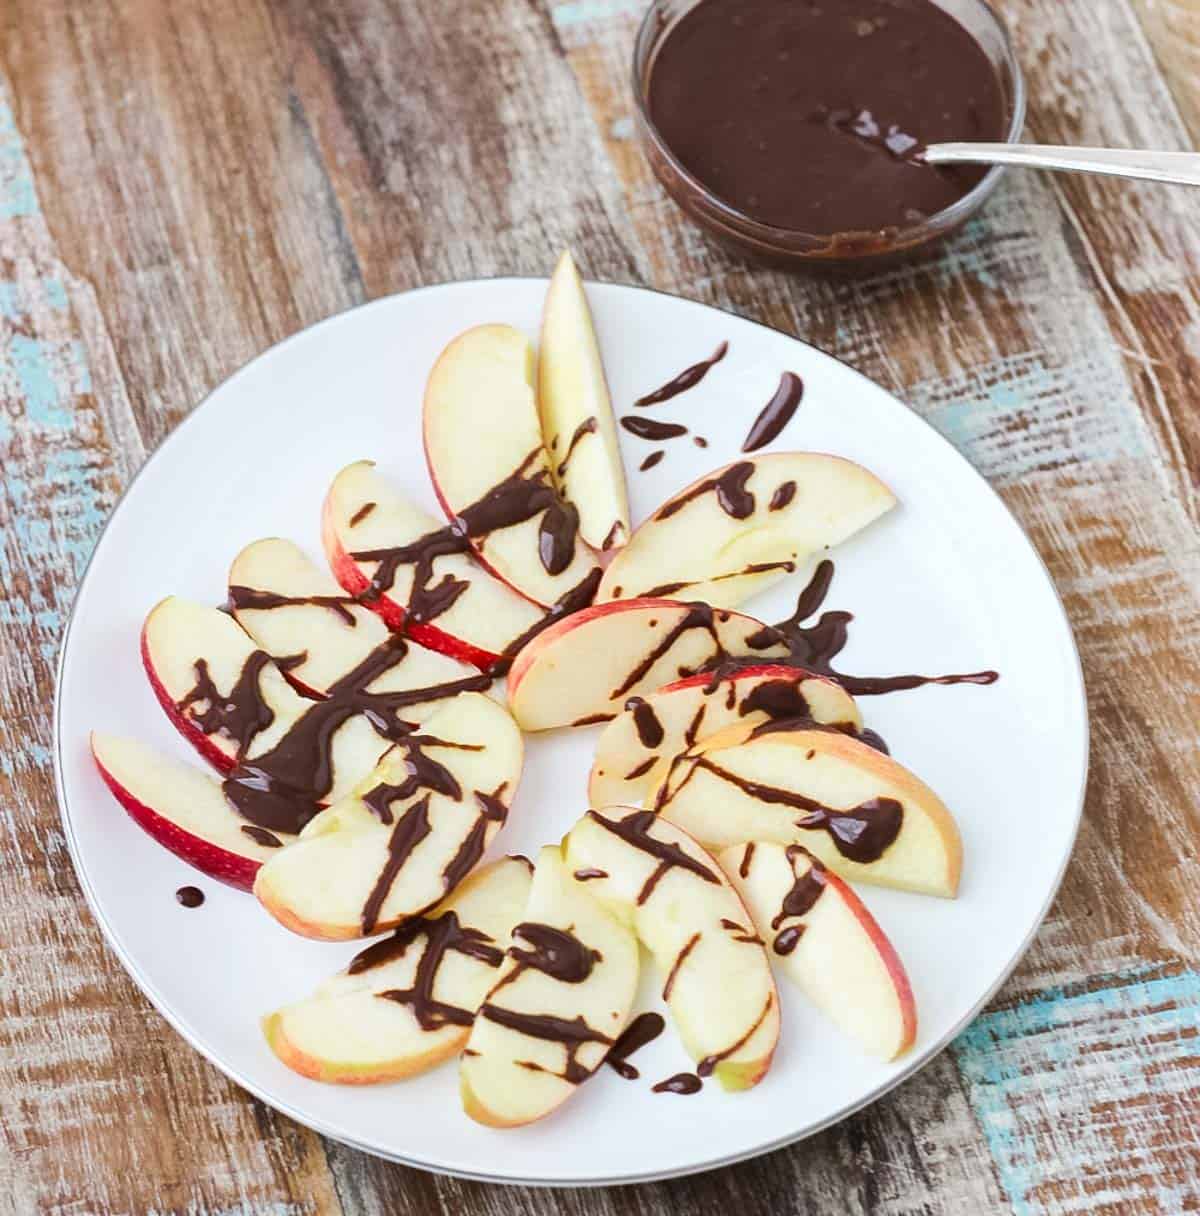 wooden table with a white plate with apple slices drizzled in chocolate sauce and a small bowl of easy chocolate sauce.